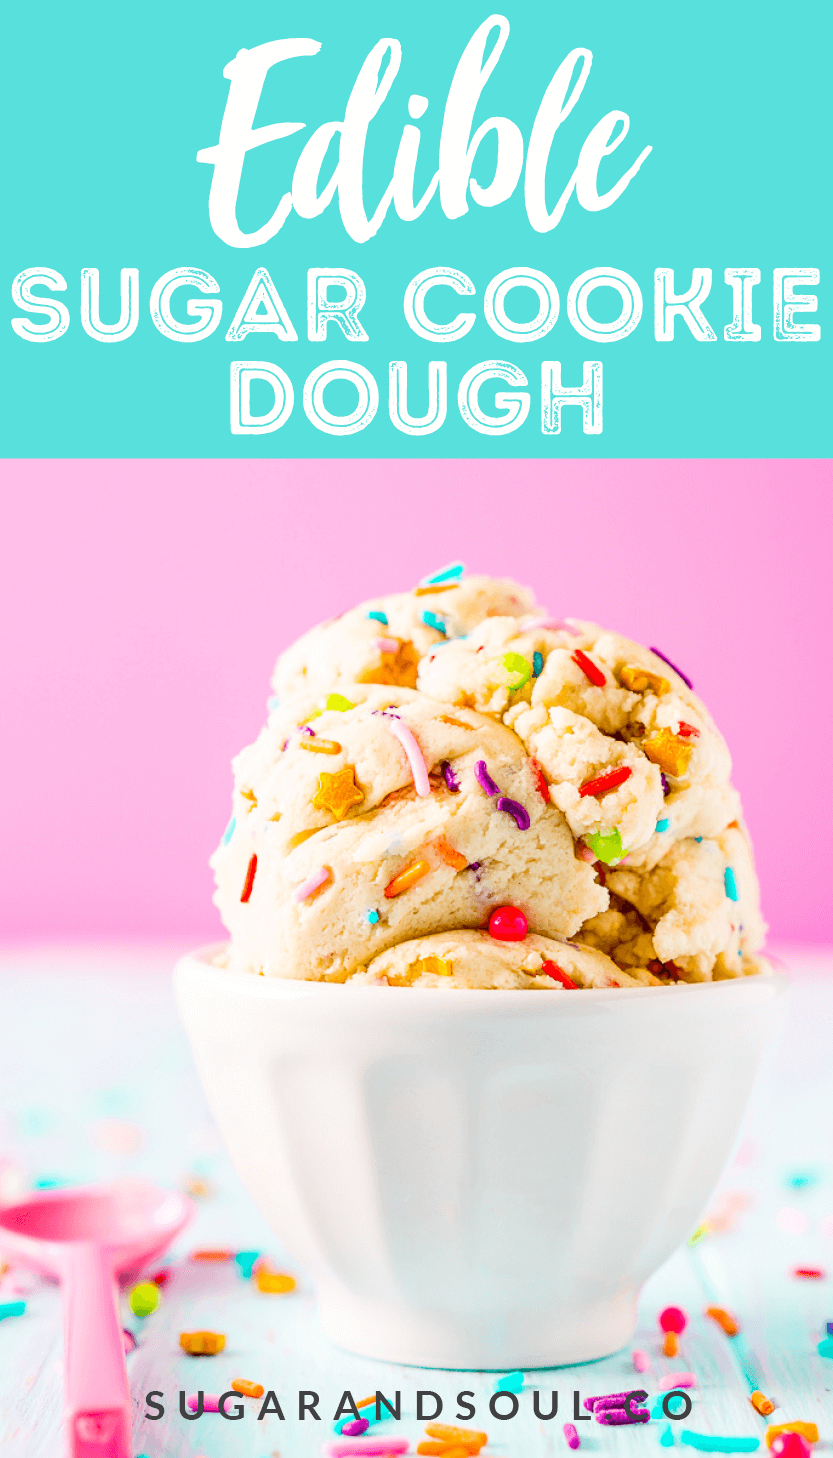 Edible Sugar Cookie Dough is an easy and delicious egg-free treat perfect for parties or just when you're craving something sweet but don't want to wait for cookies to bake! via @sugarandsoulco